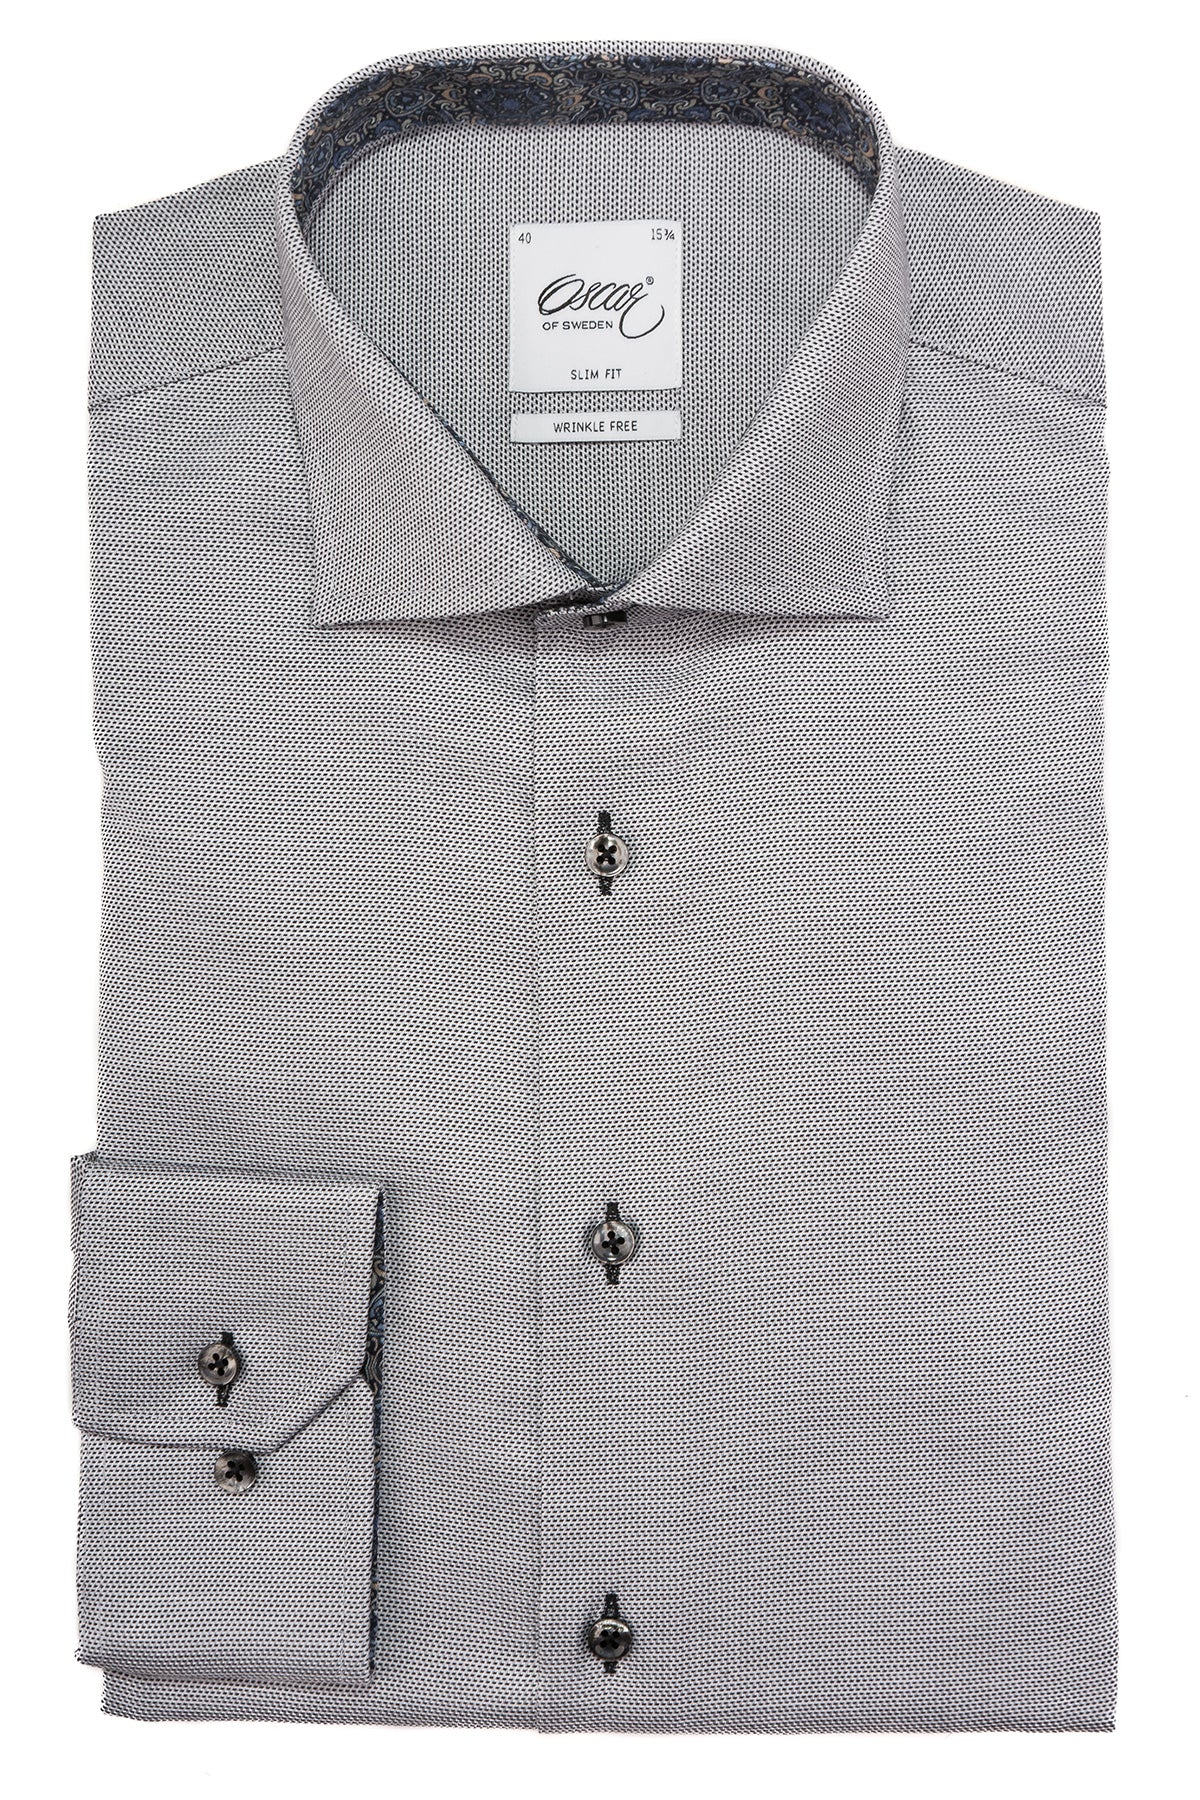 Grey slim fit shirt with contrast details